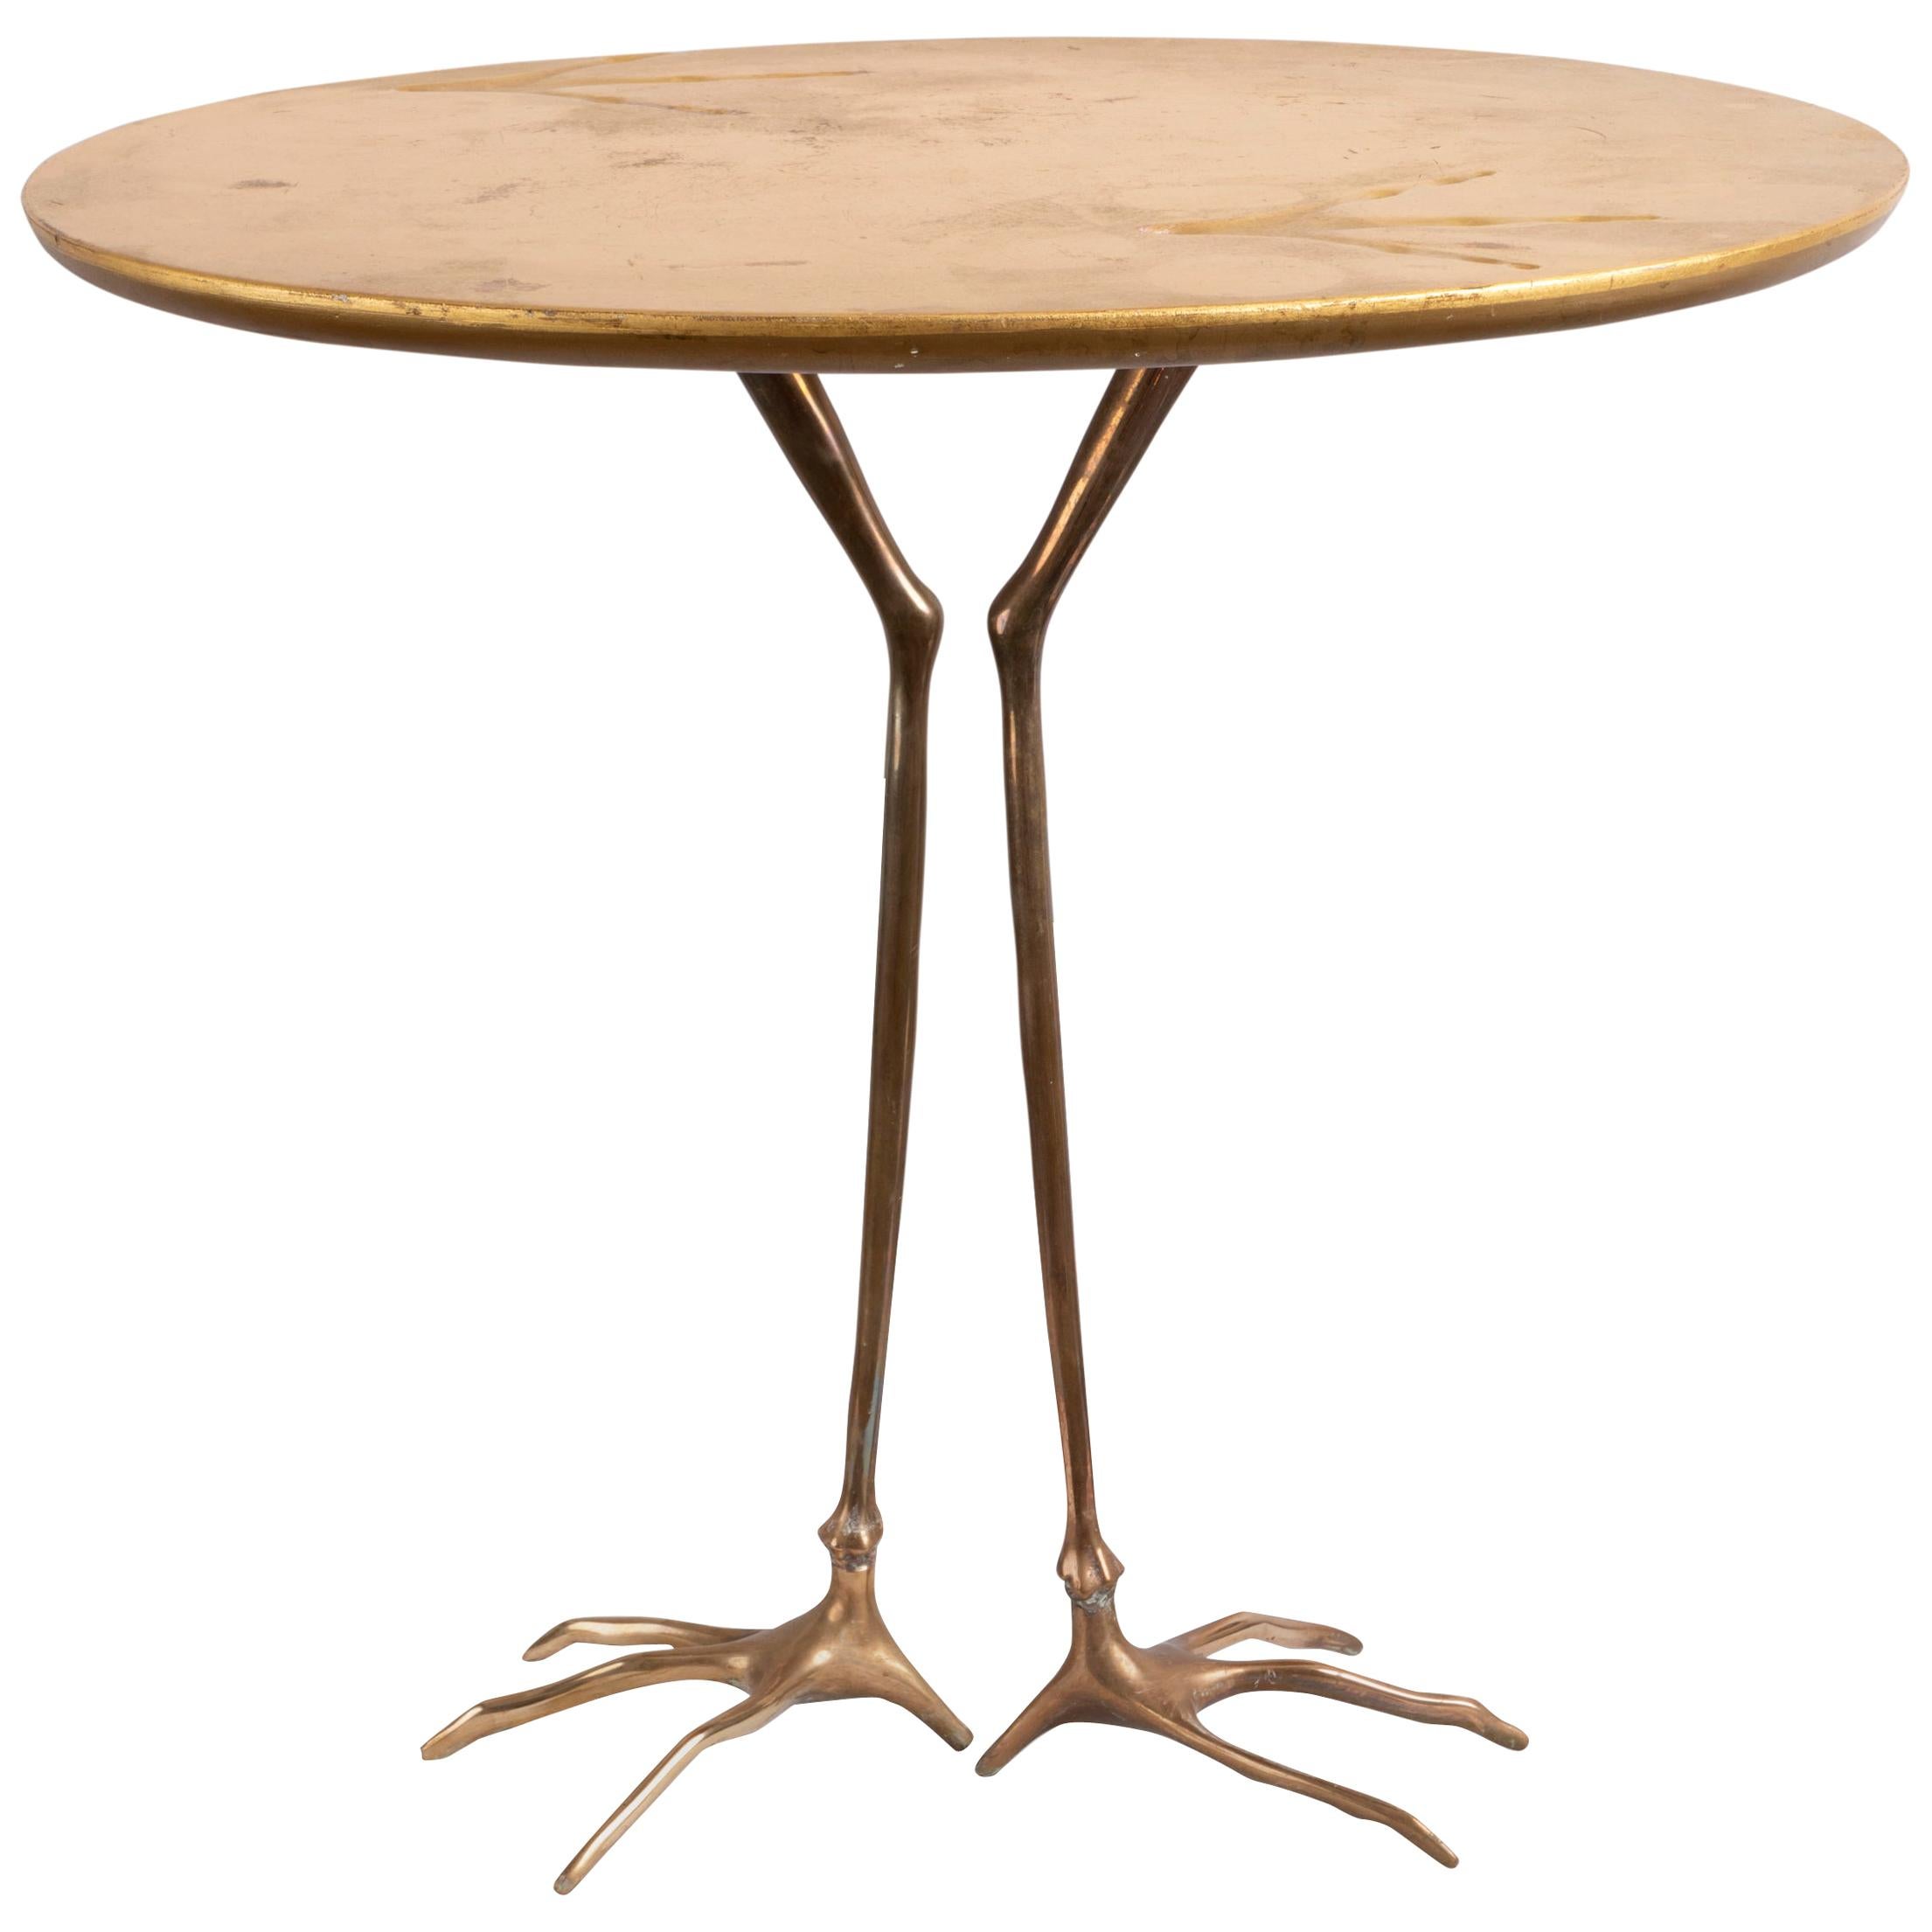 Traccia Table Designed by Meret Oppenheim